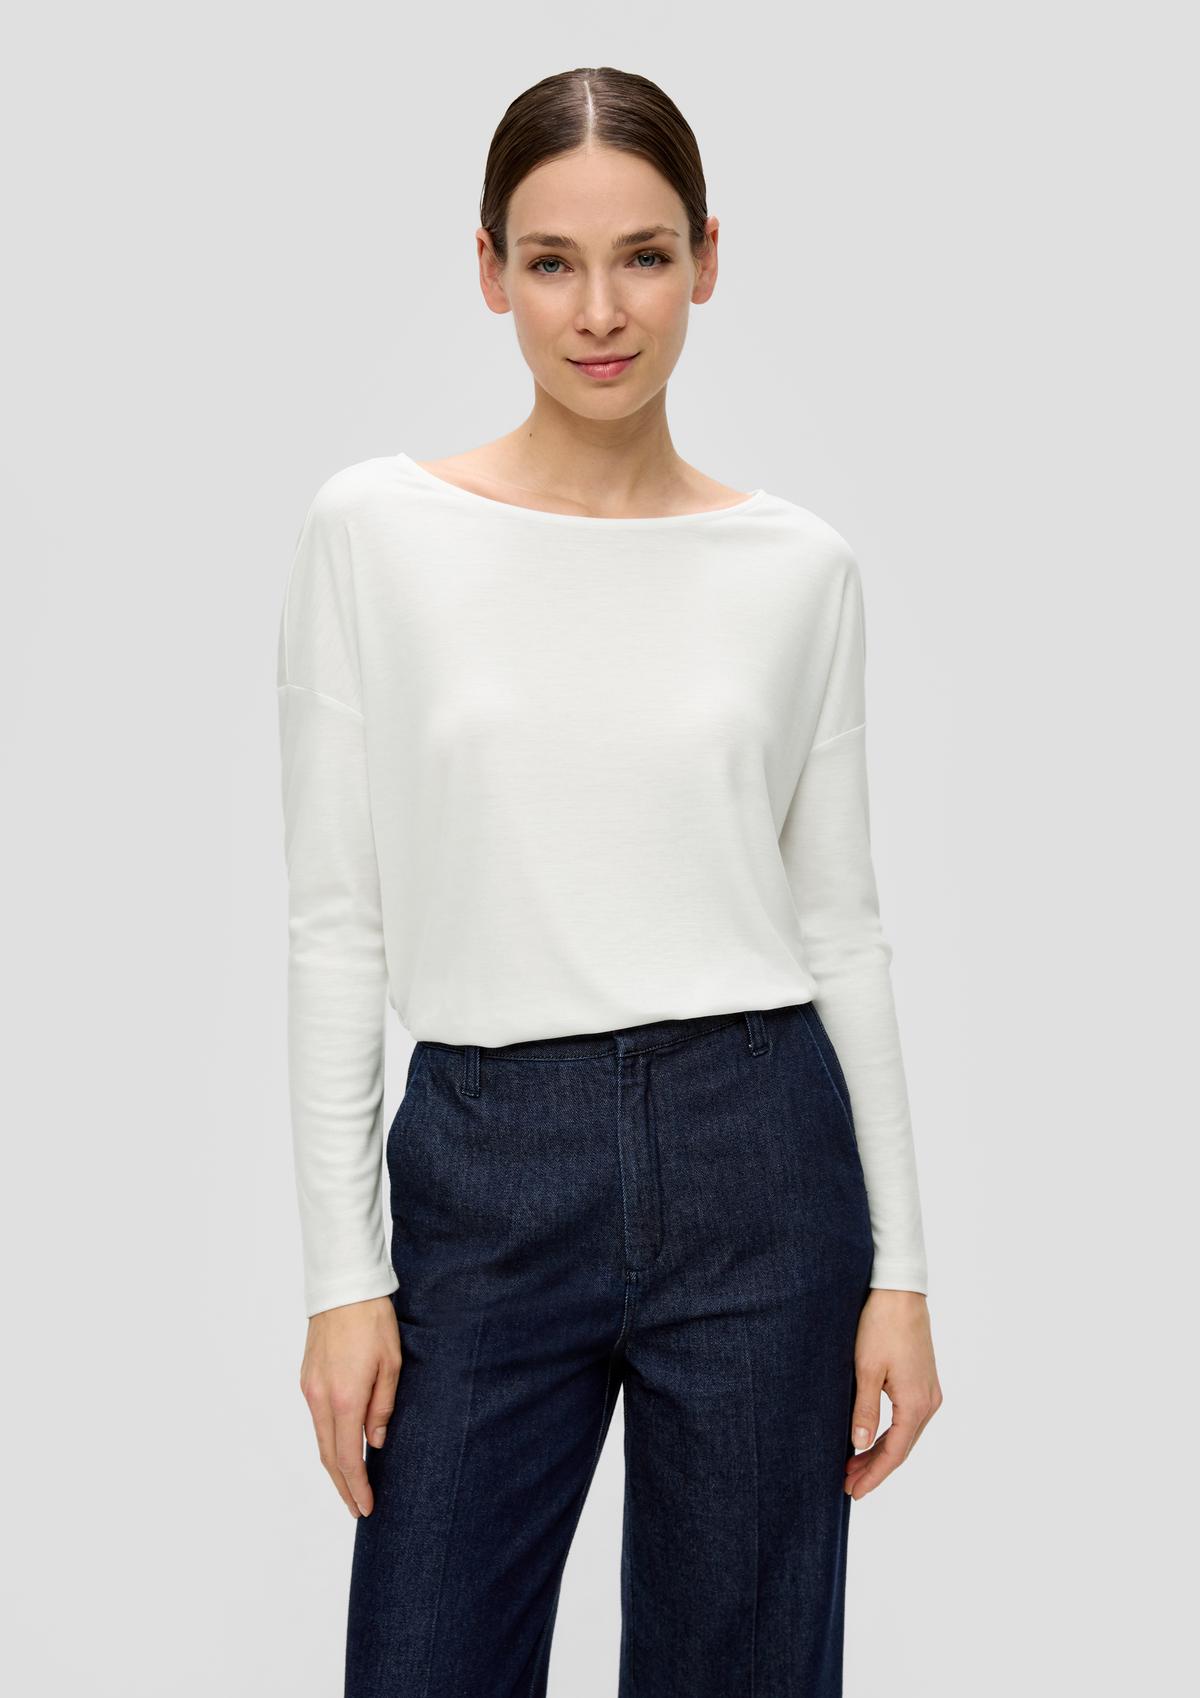 s.Oliver Long sleeve top with dropped shoulders